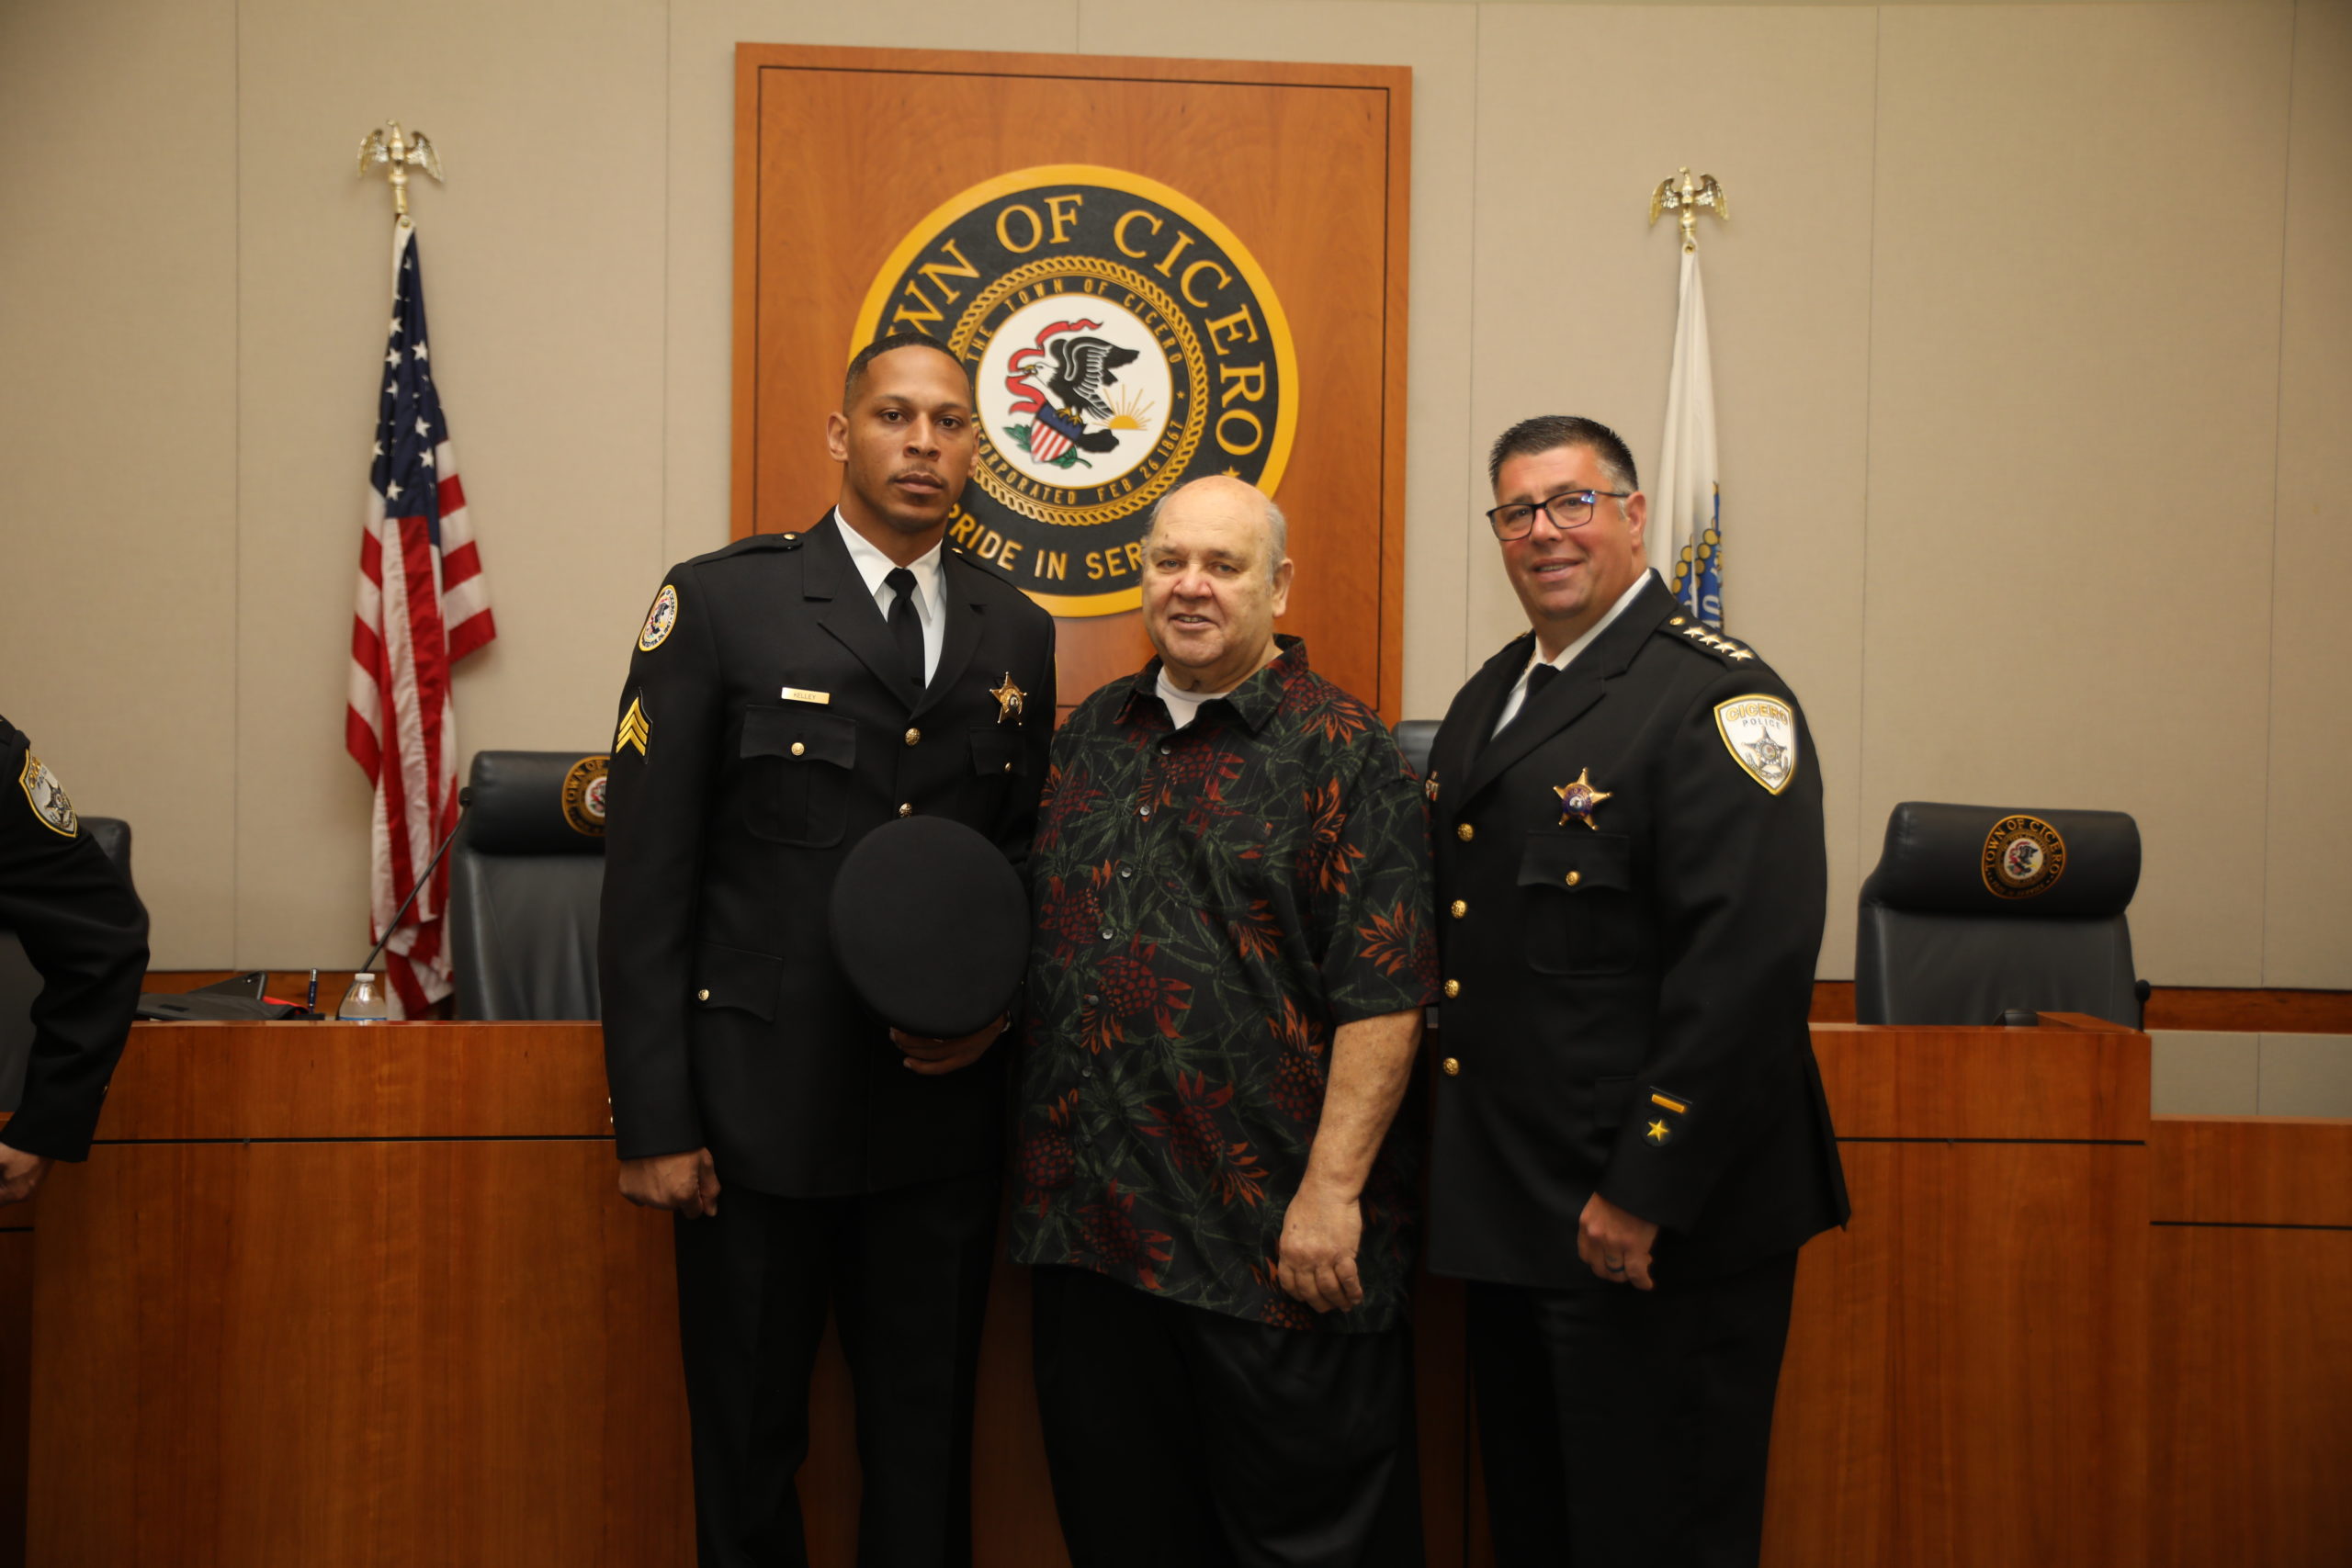 Sgt. Steven Kelly with Cicero President Larry Dominick and CIcero Police Chief Jerry Chlada